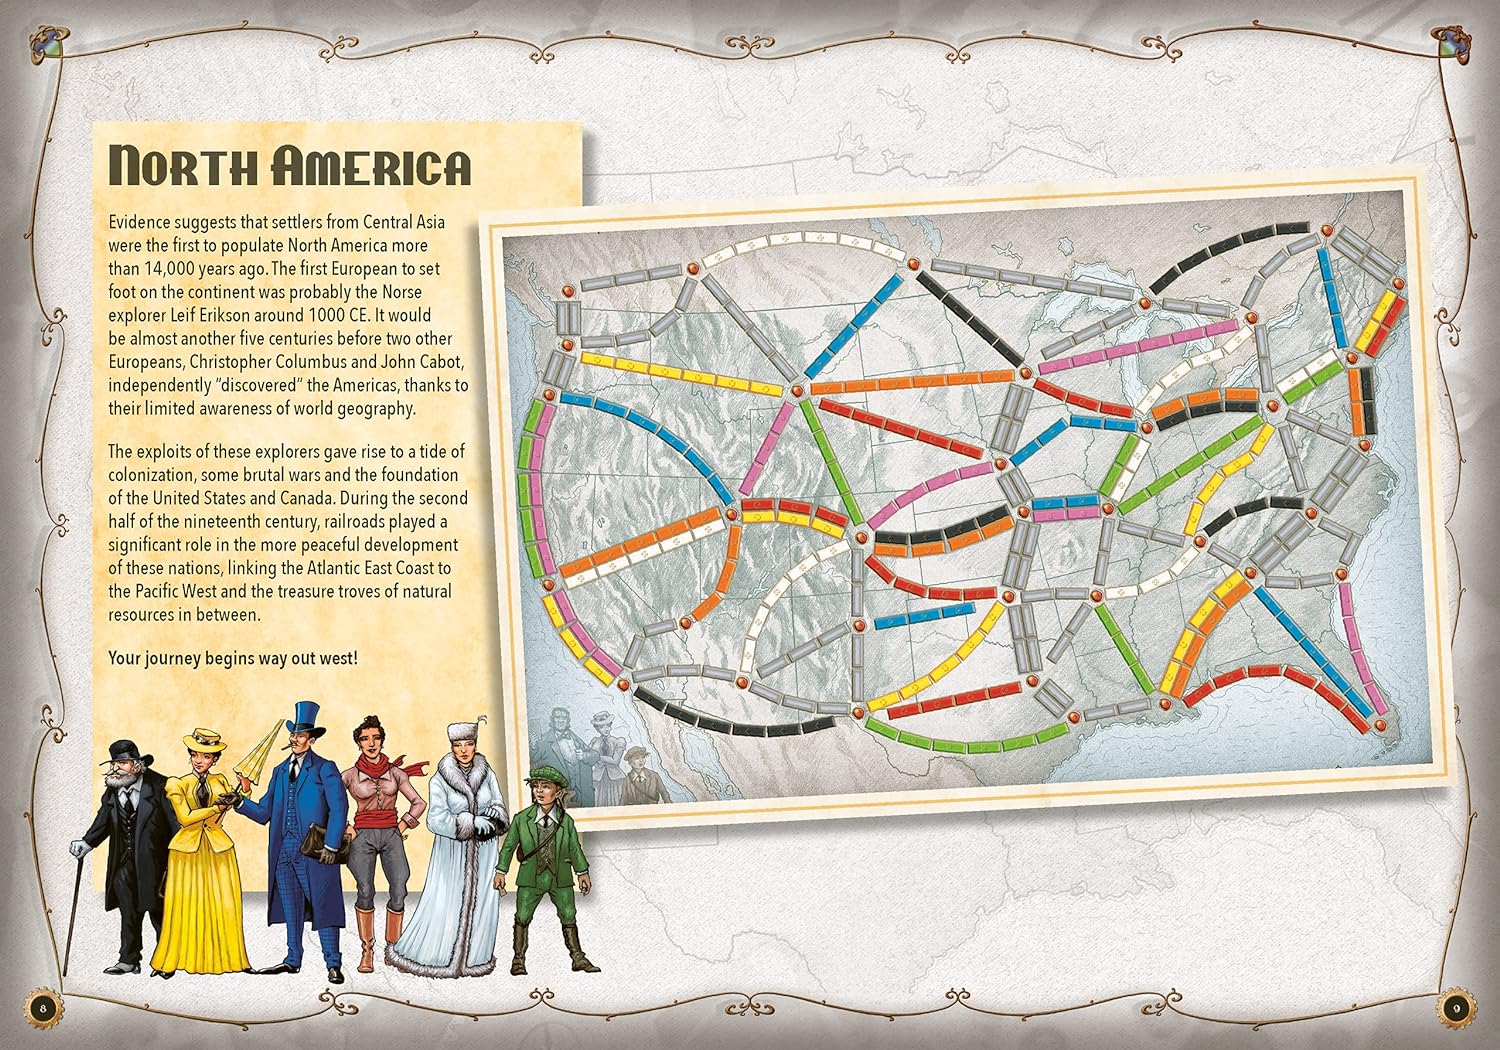 Ticket to Ride Puzzle Book. Based on the award-winning board game, this book is packed full of 100 original, colourful and exciting challenges for puzzlers and board-game enthusiasts alike.